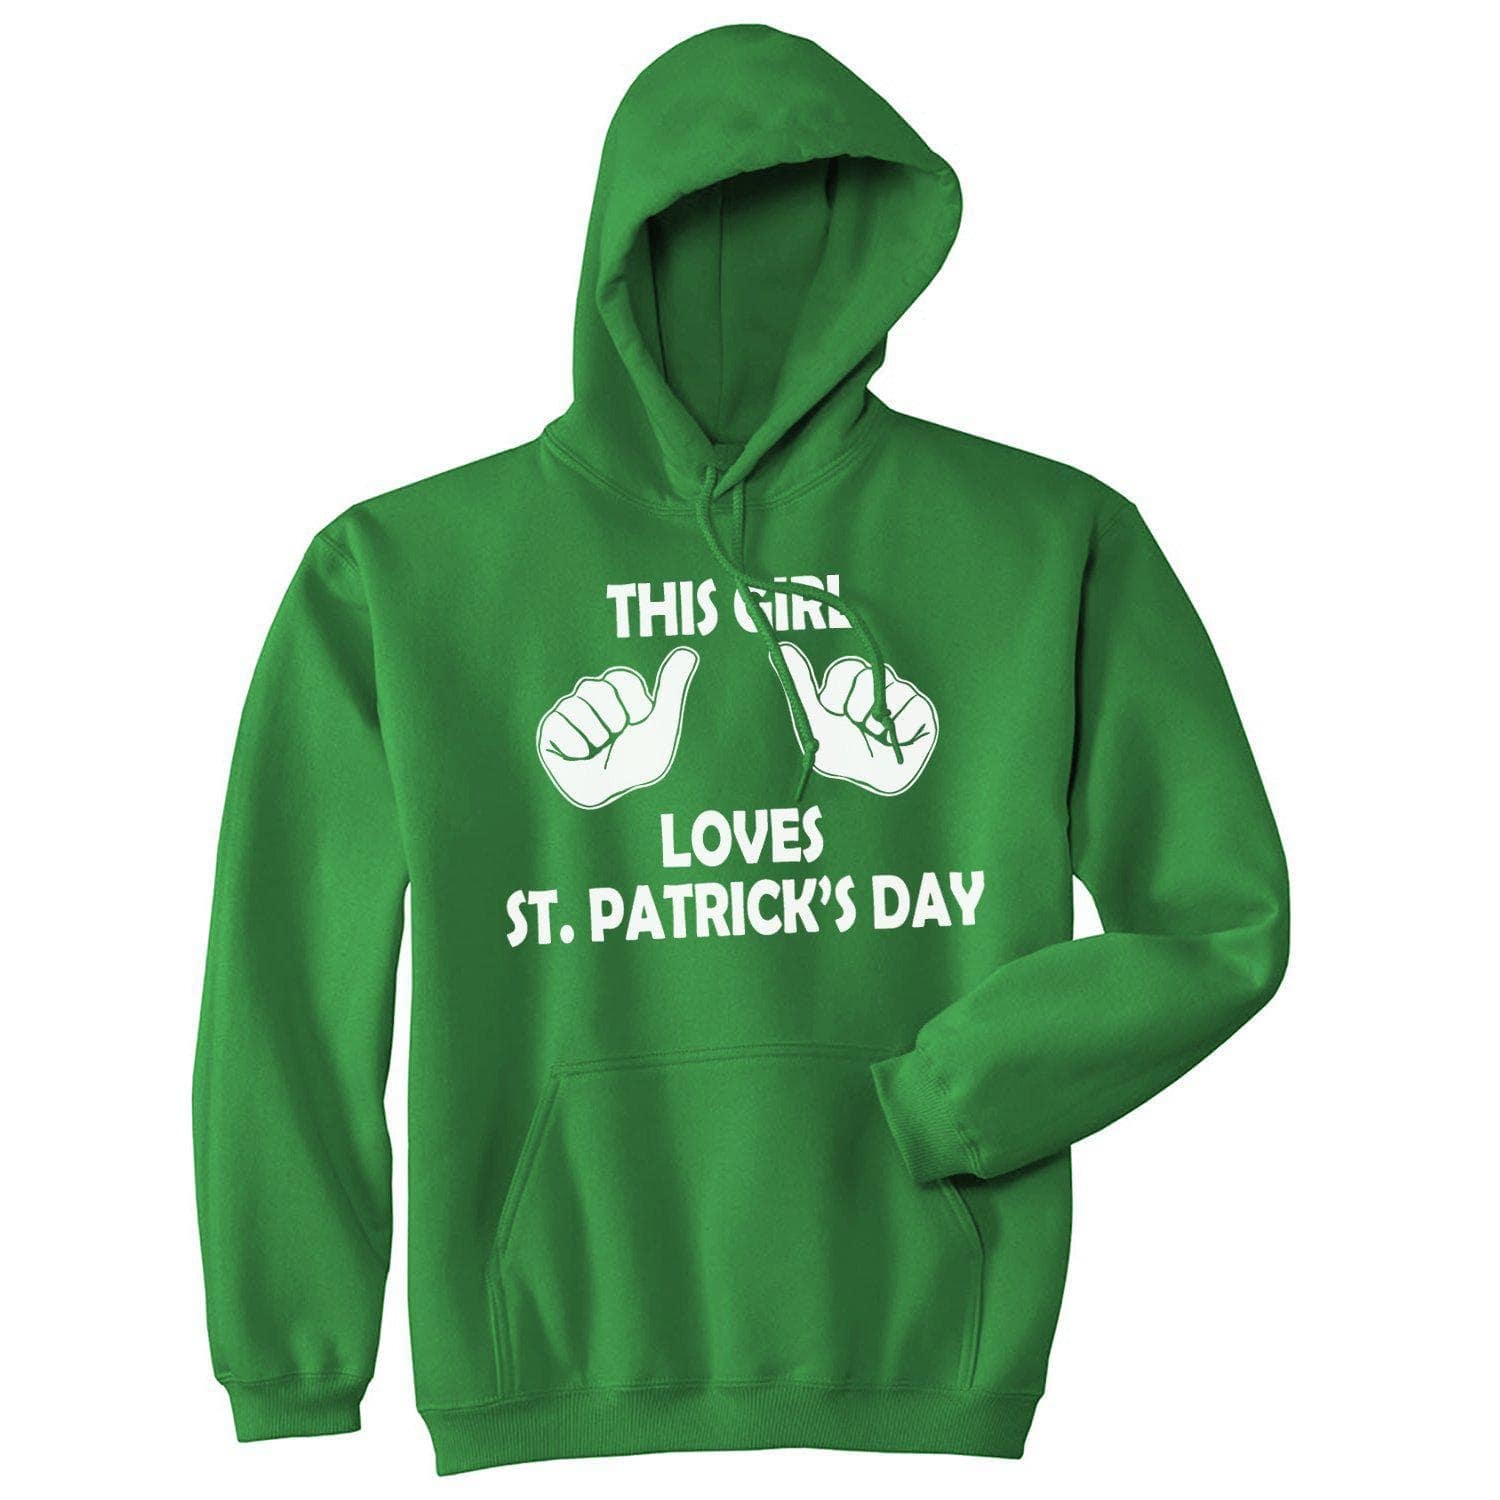 This Girl Loves St. Patrick’s Day Hoodie  -  Crazy Dog T-Shirts